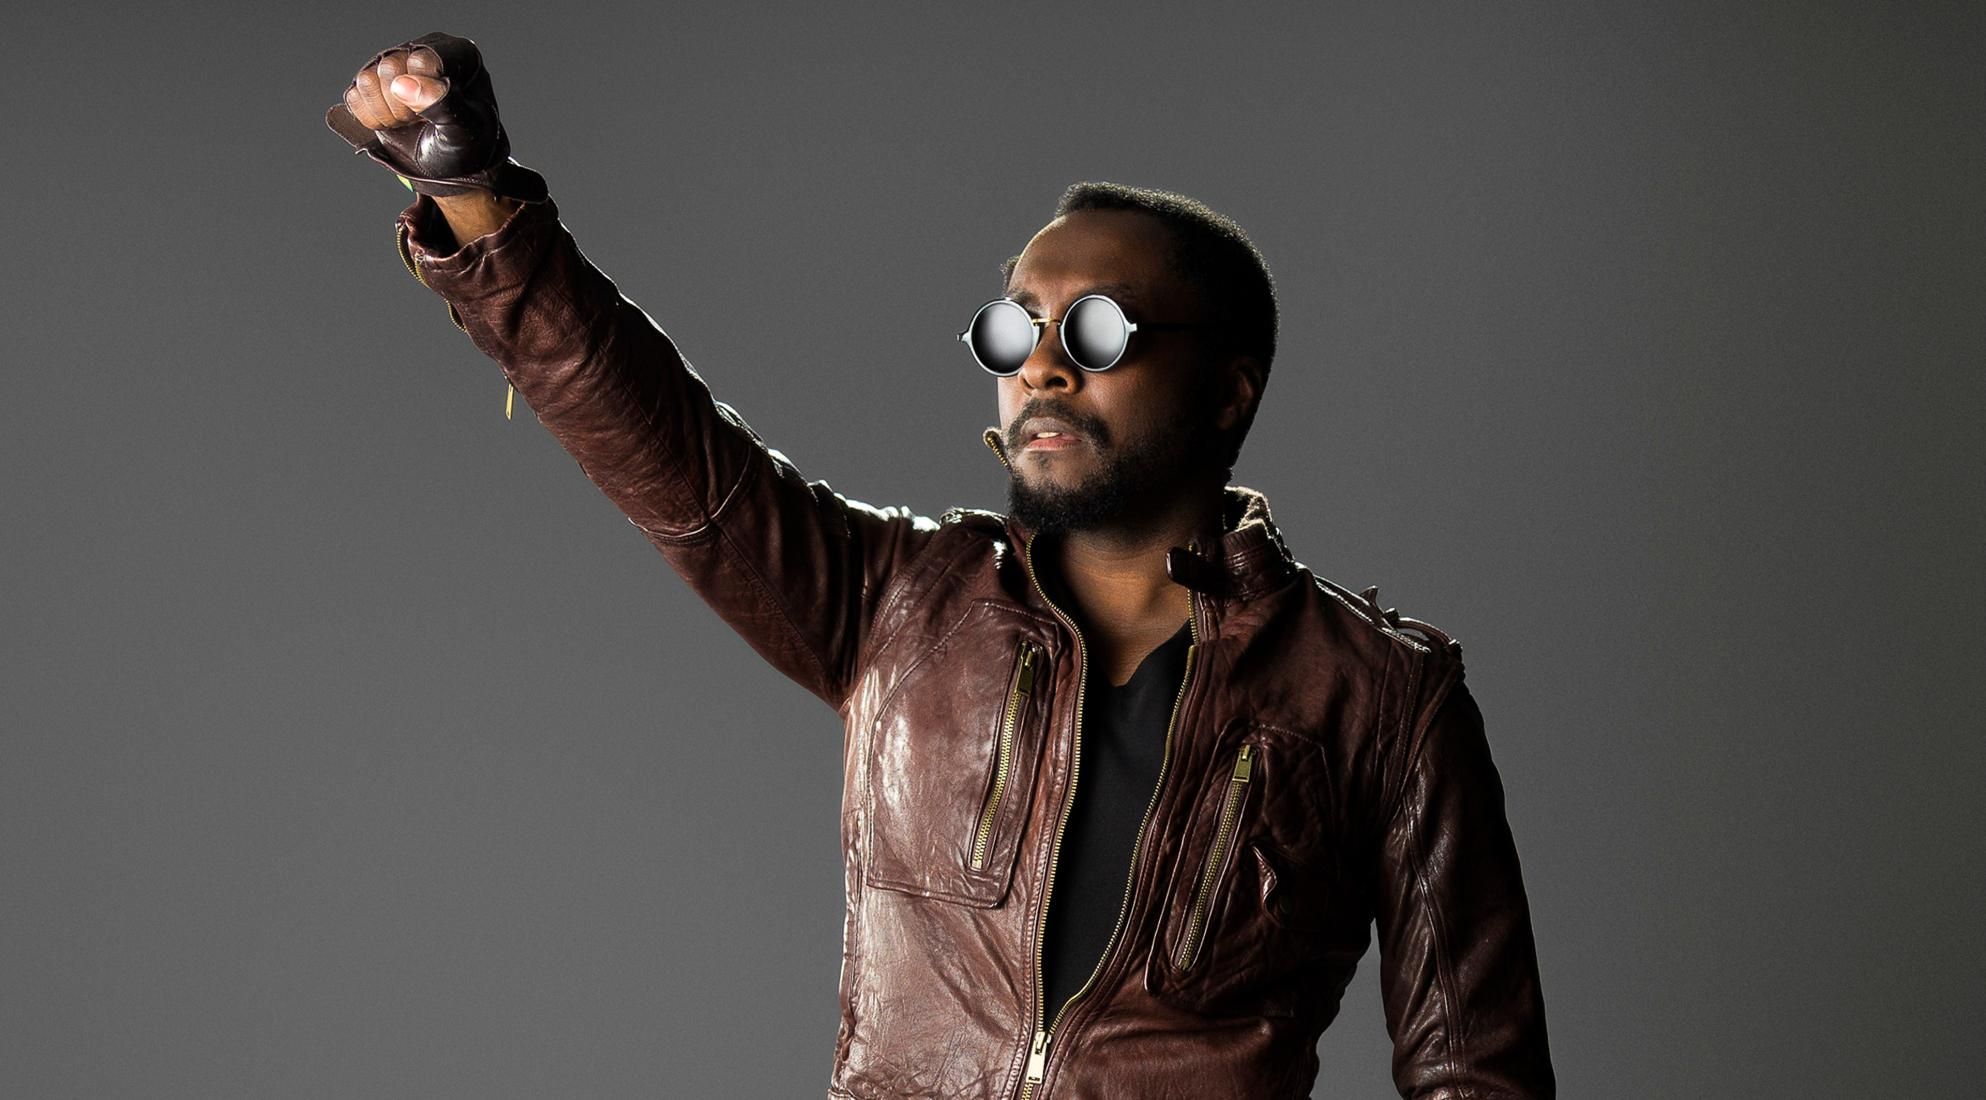 Will.i.am artist page